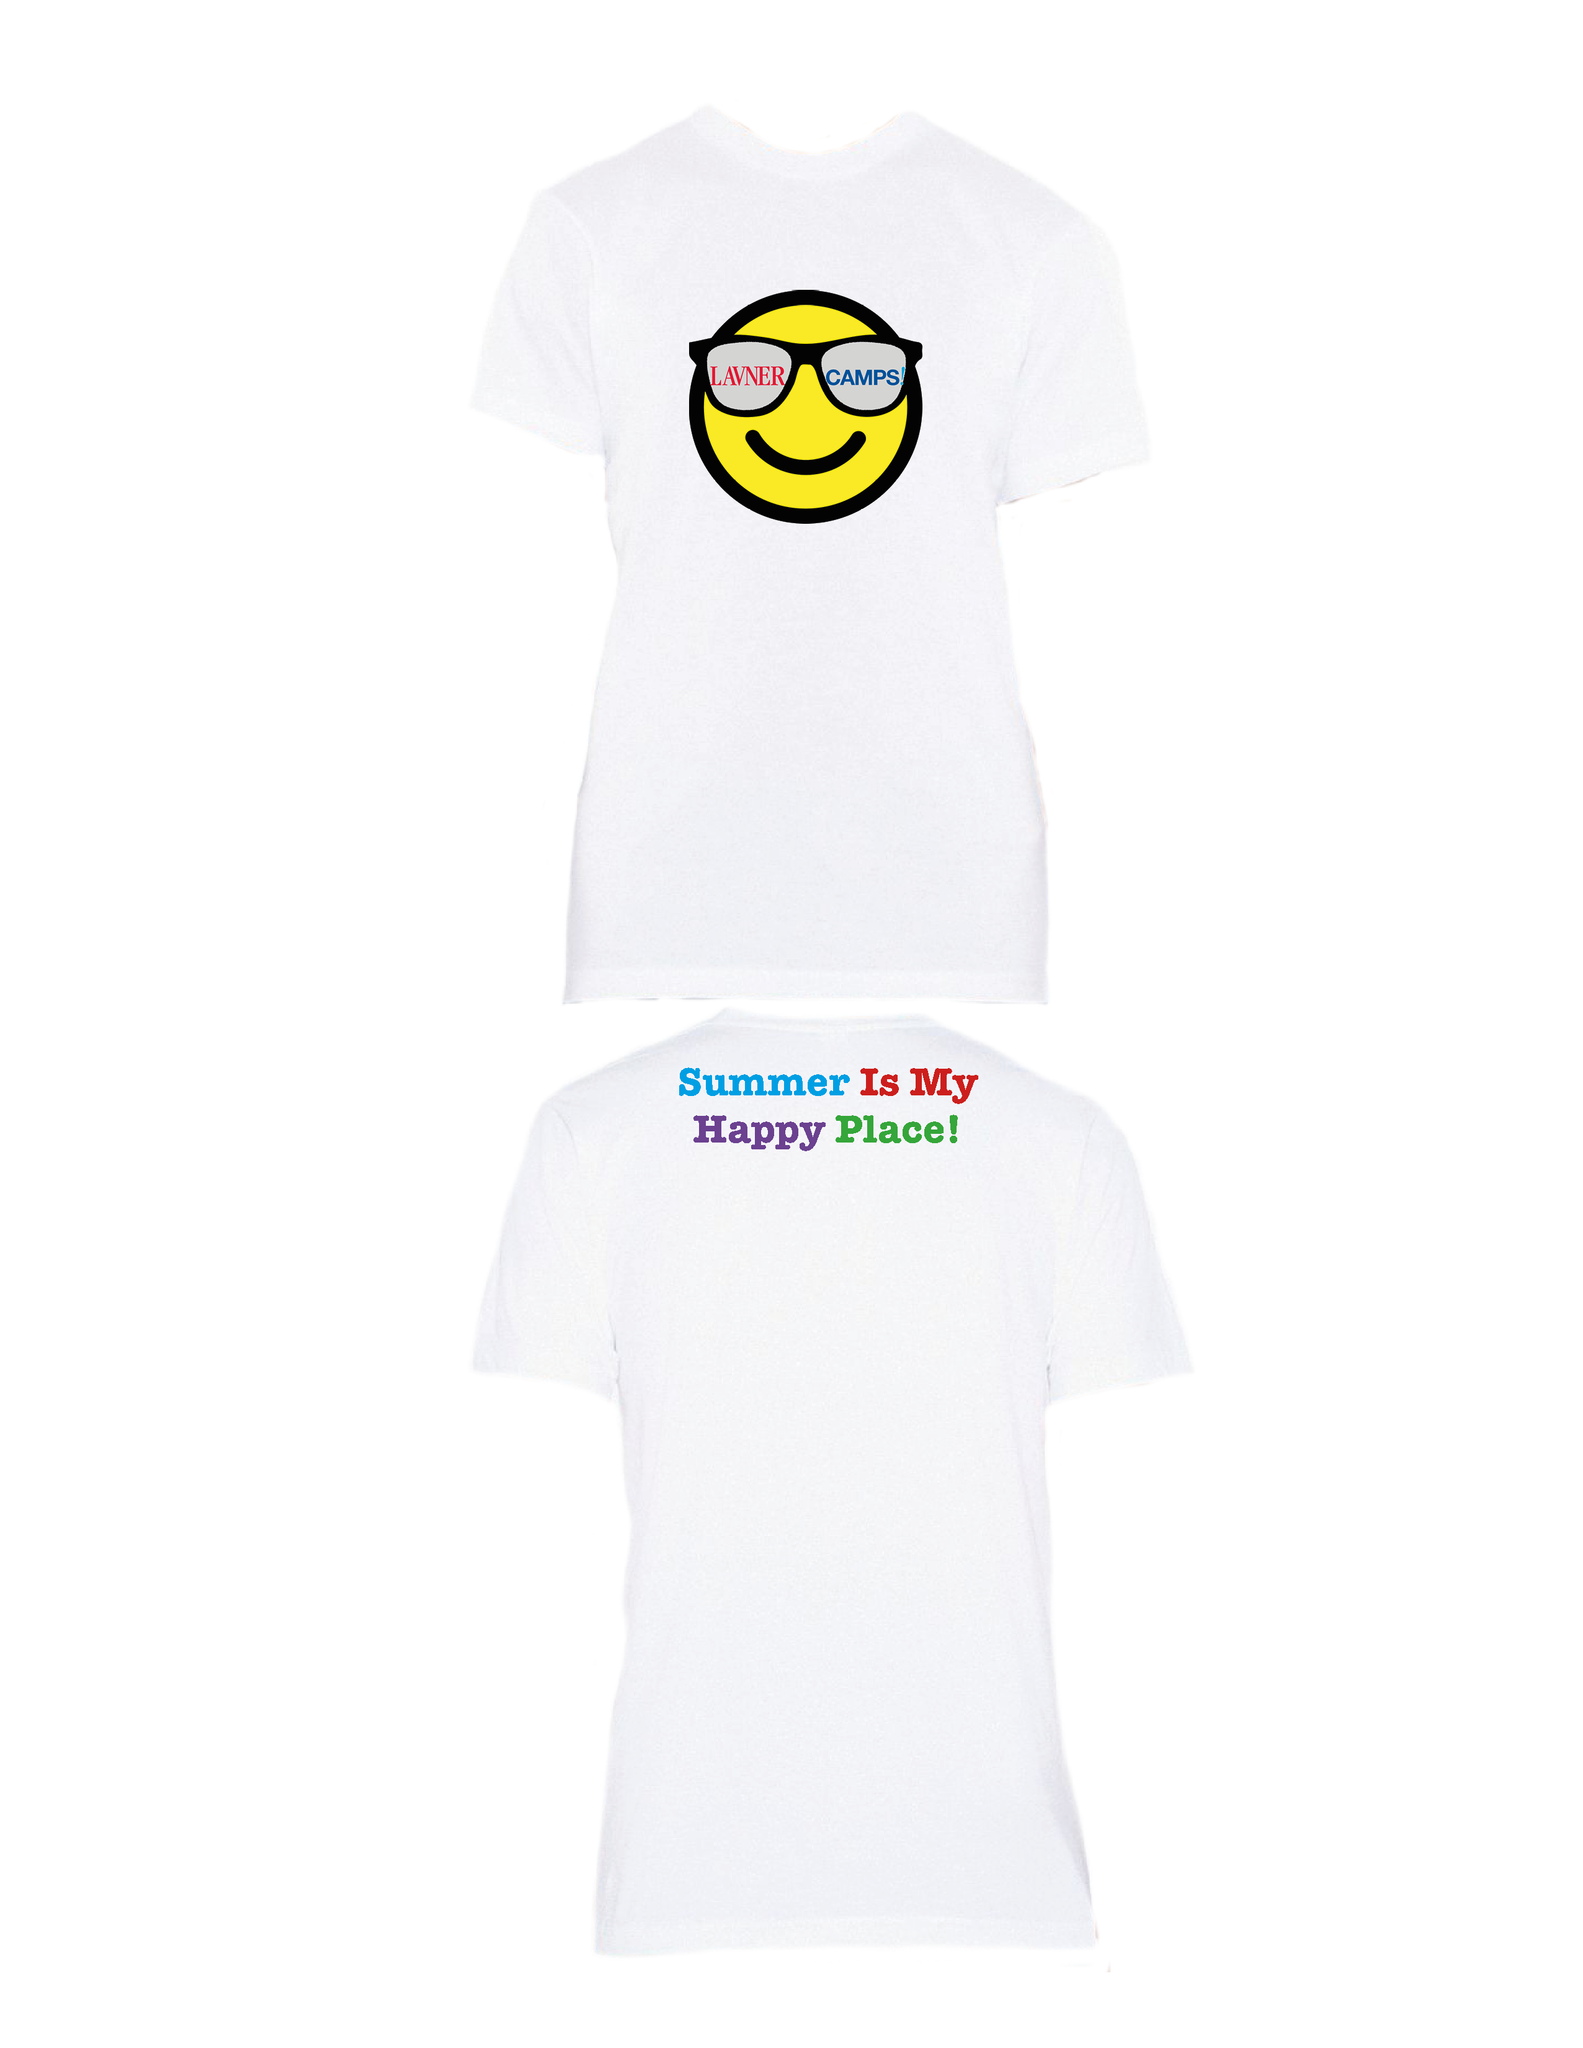 Summer Happy Place T-Shirt (Adult)